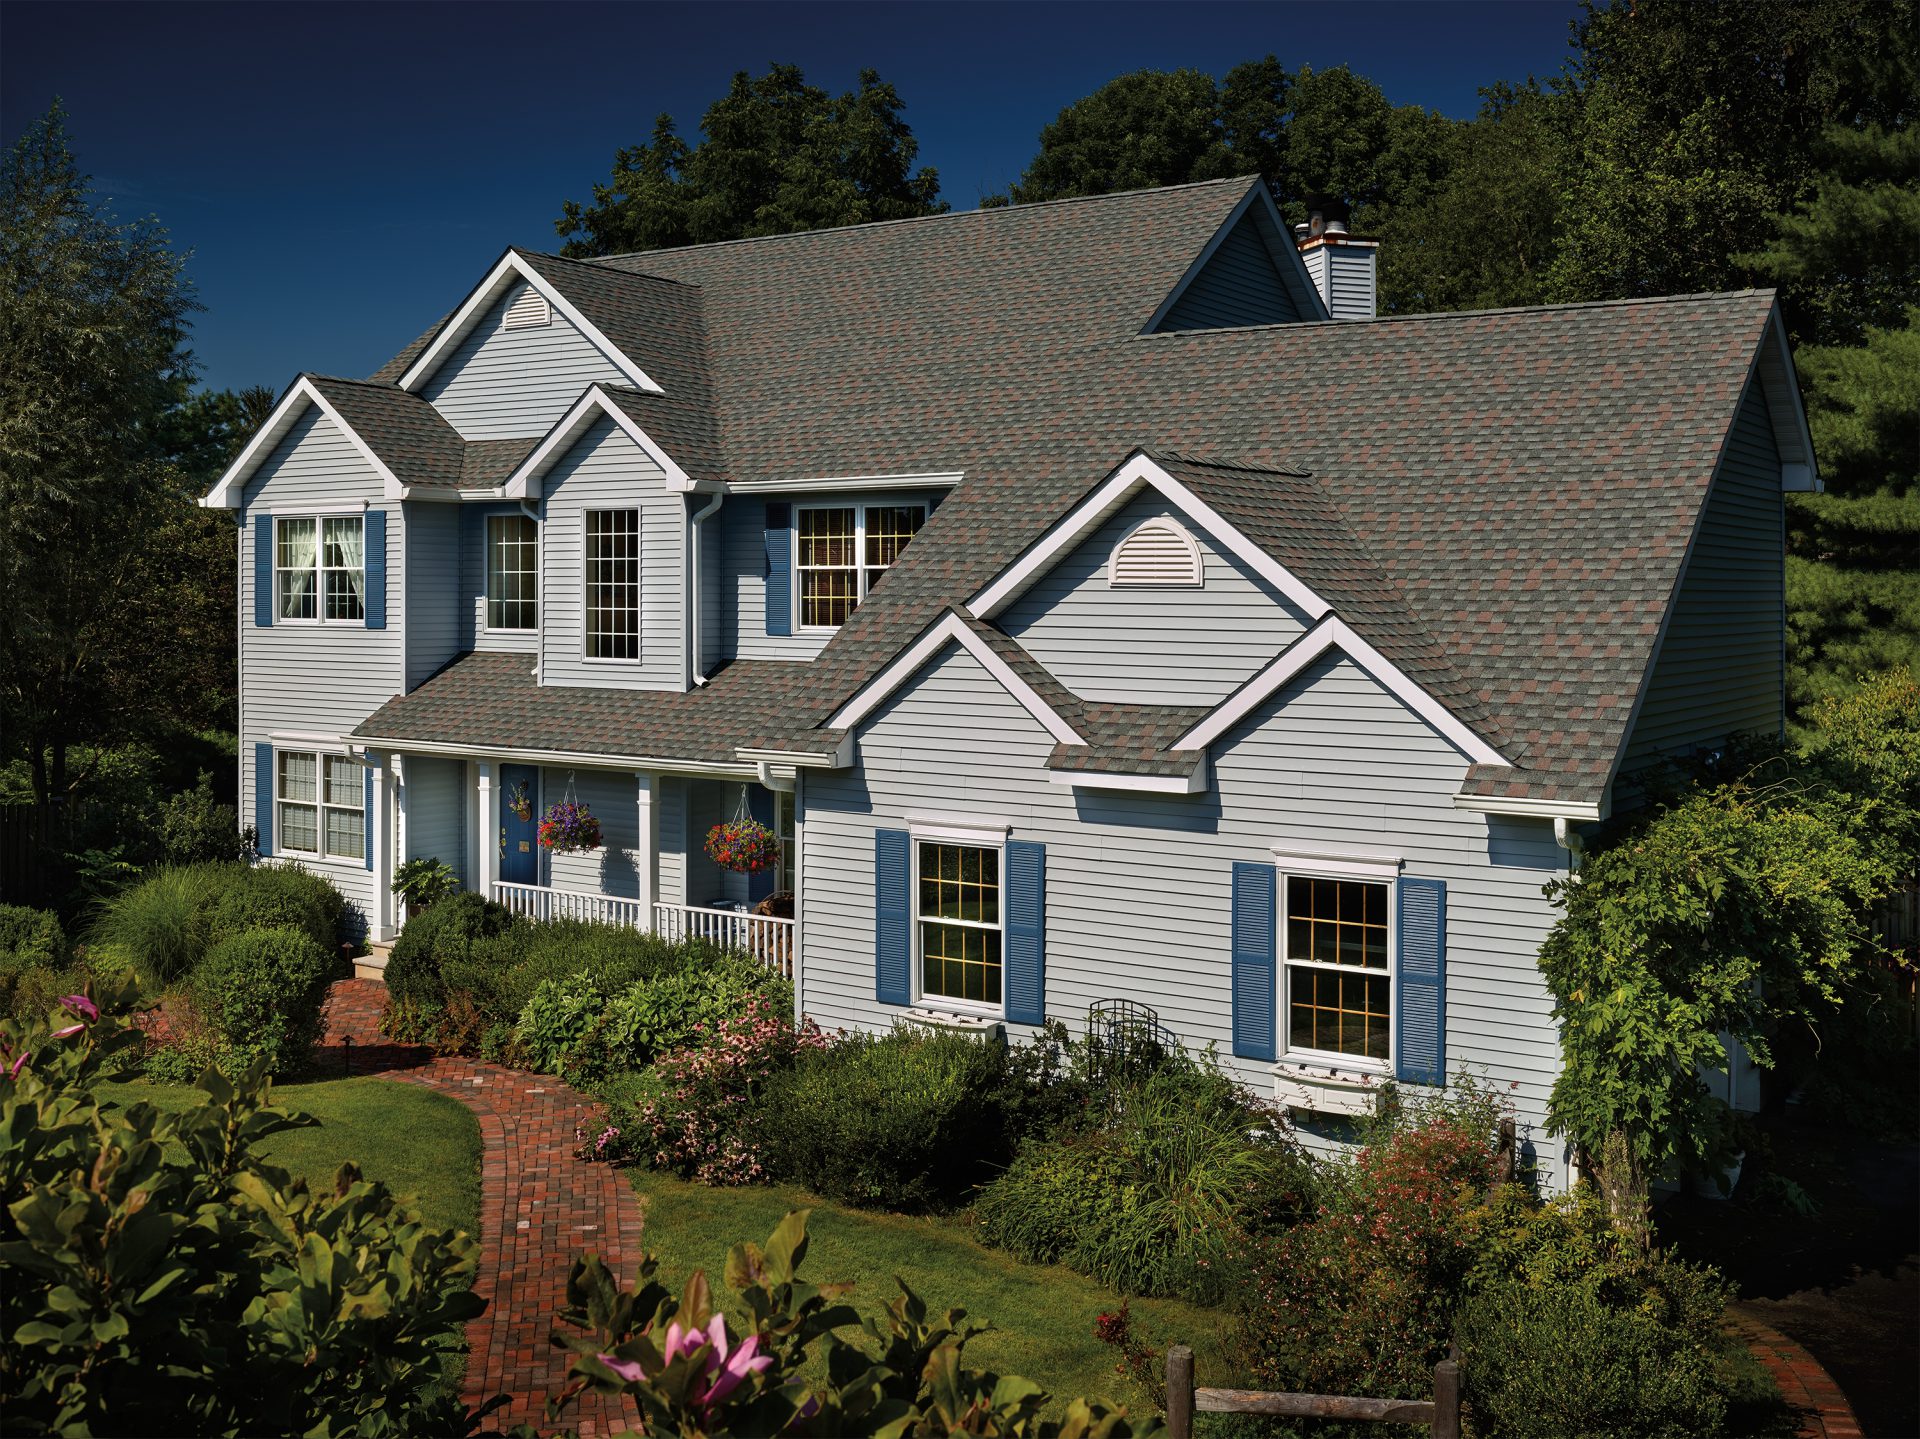 Roofing Company Arlington Heights, IL – Lion Roofing Contractors Are Ready to Work For You!